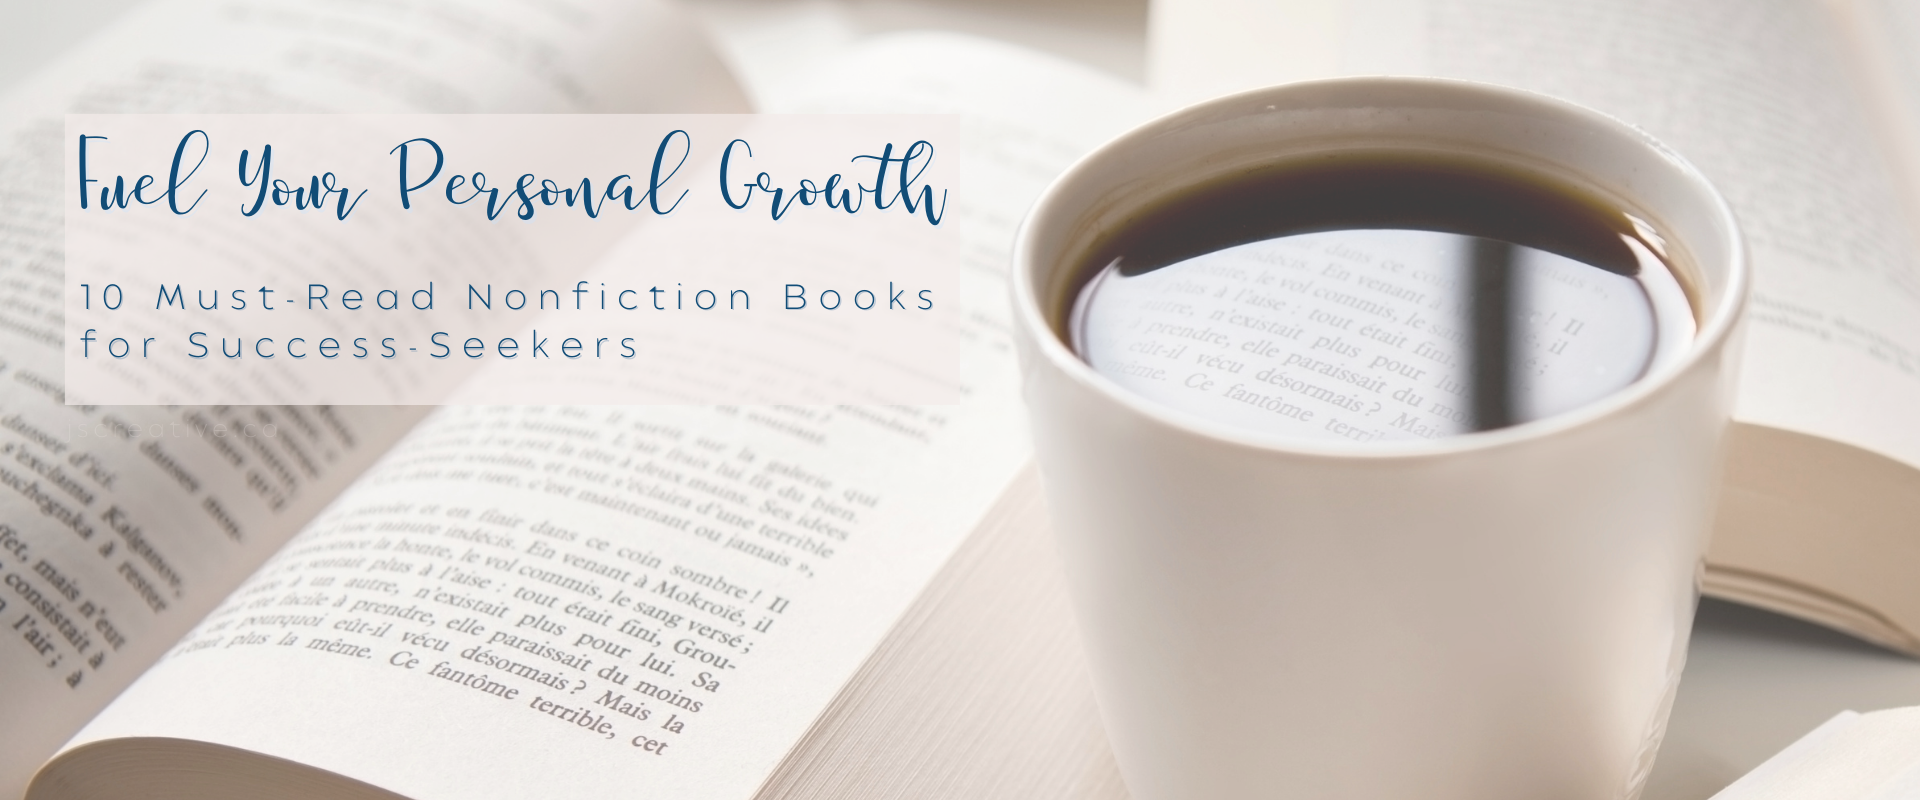 Fuelling Your Personal Growth: 10 Must-Read Nonfiction Books for Success Seekers | jscreative.ca